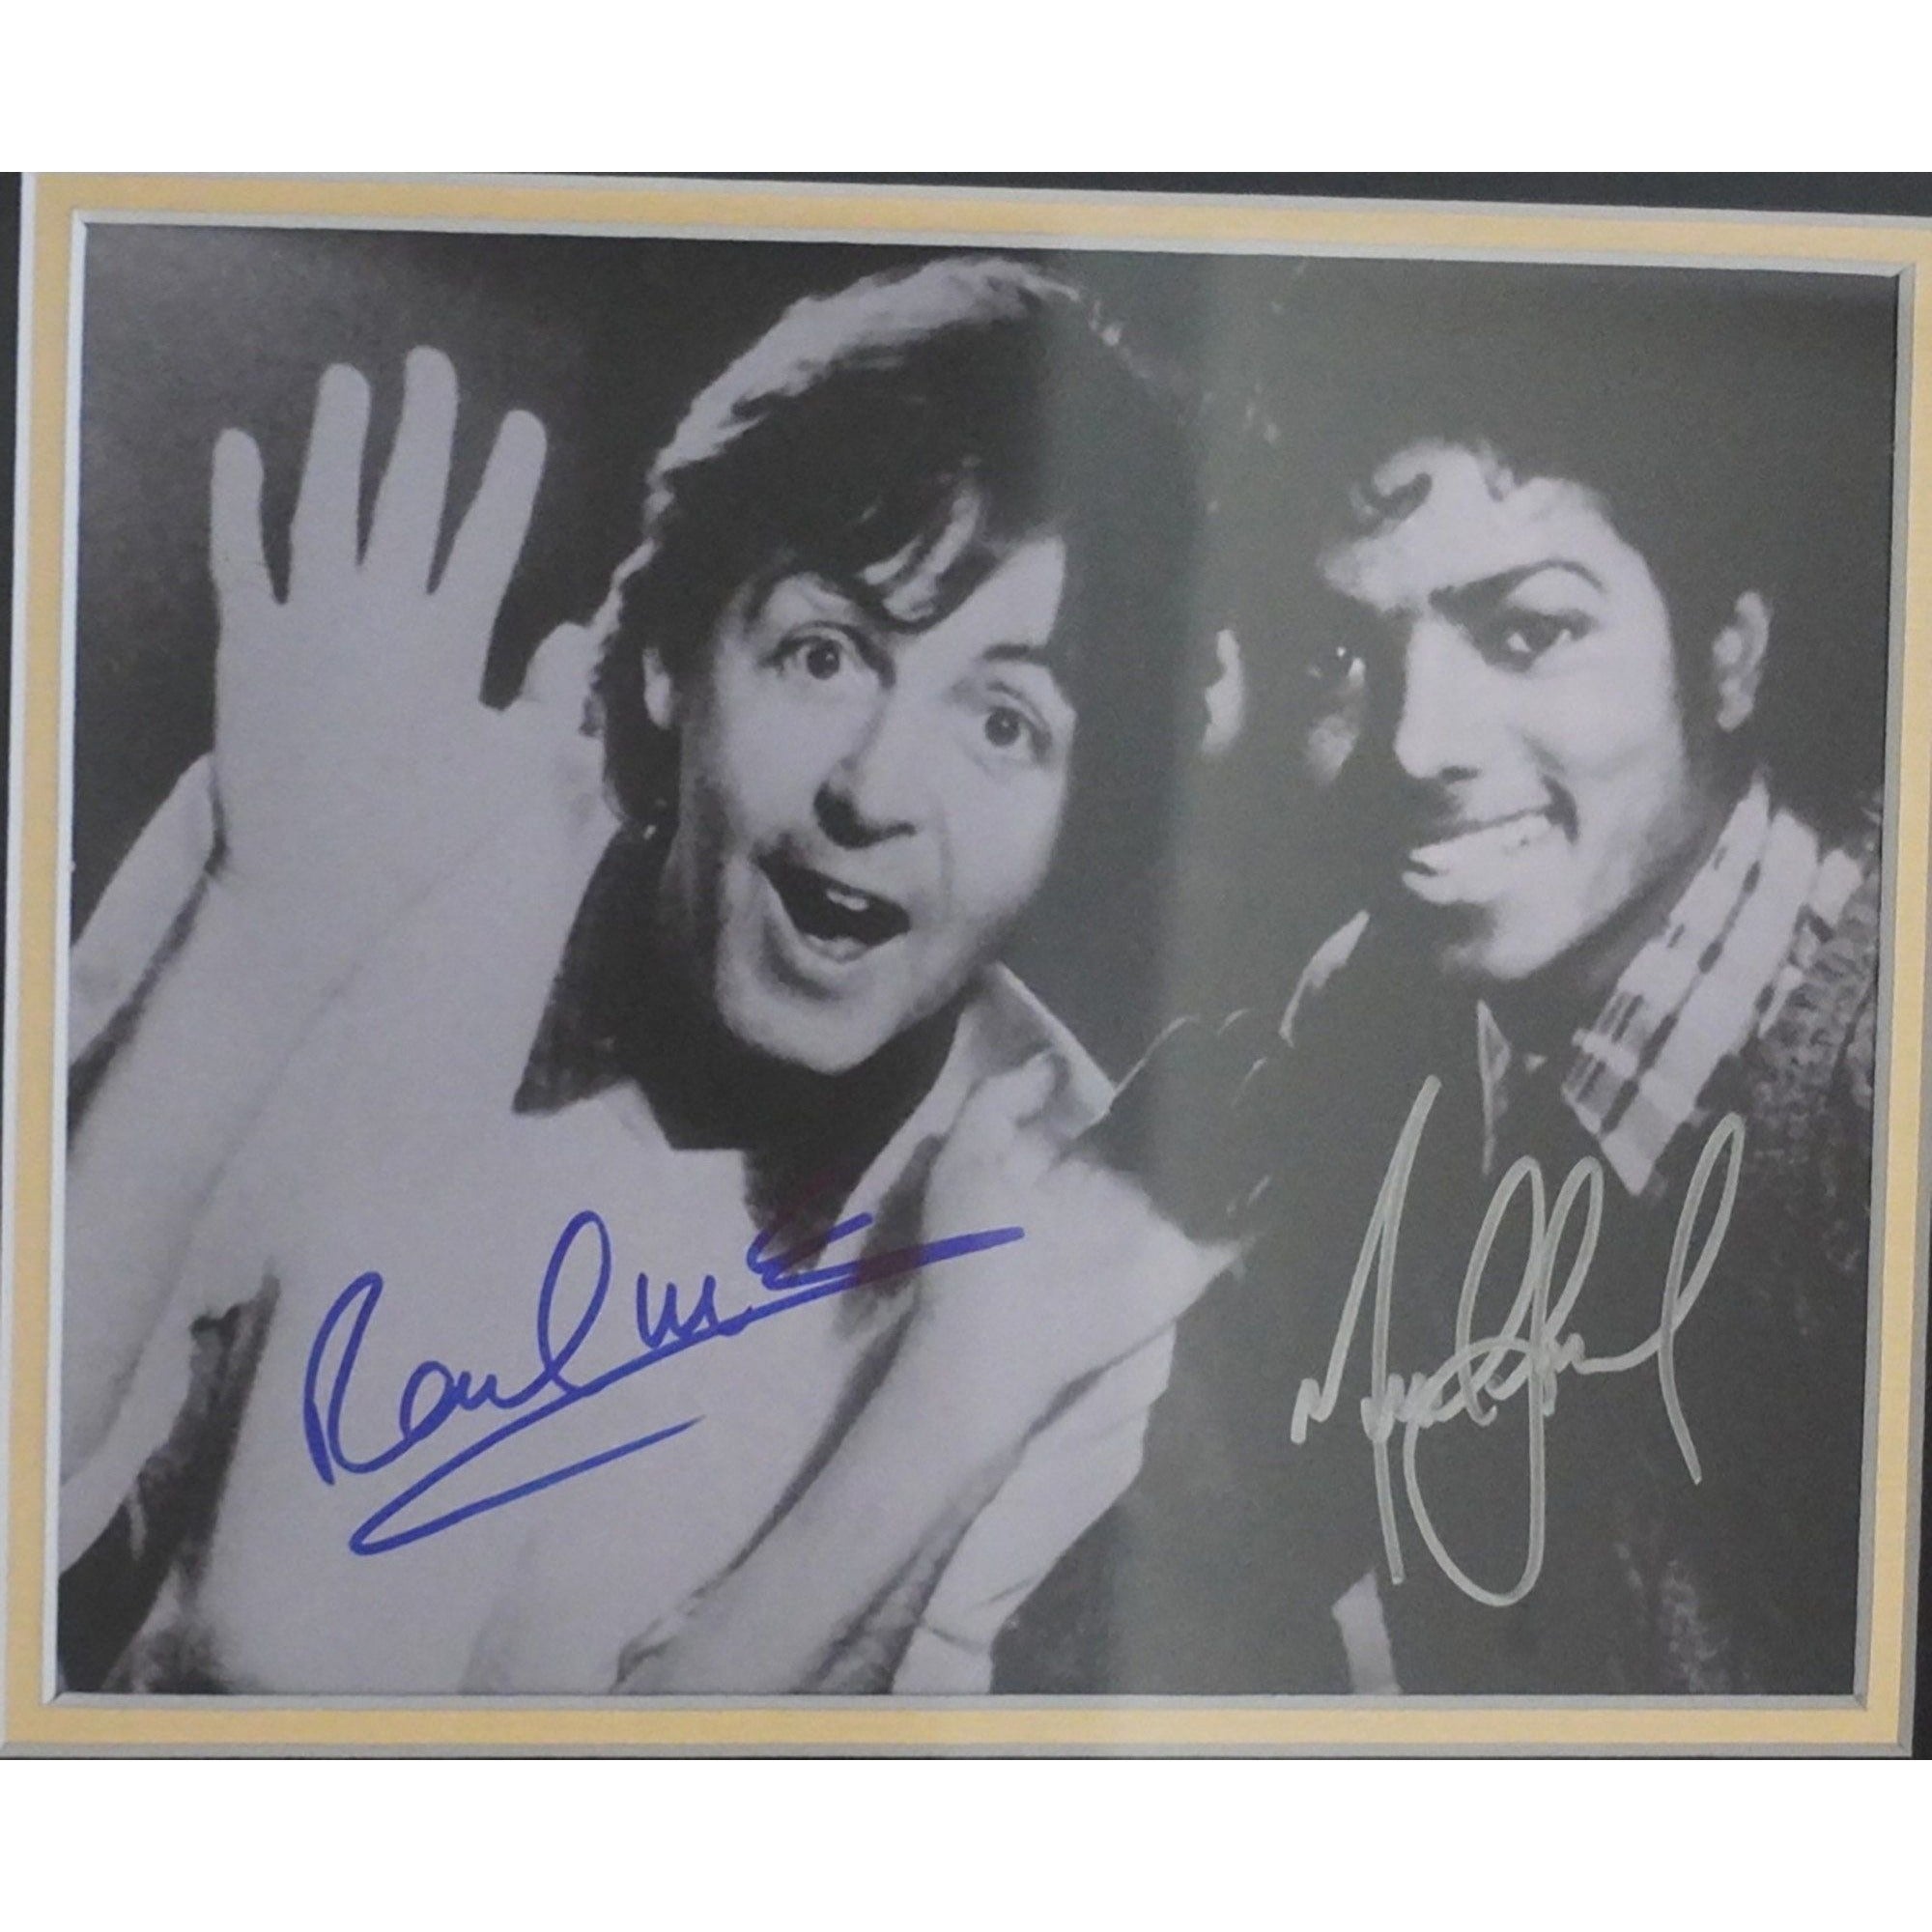 Michael Jackson and Paul McCartney 8 x 10 photo signed and framed with proof